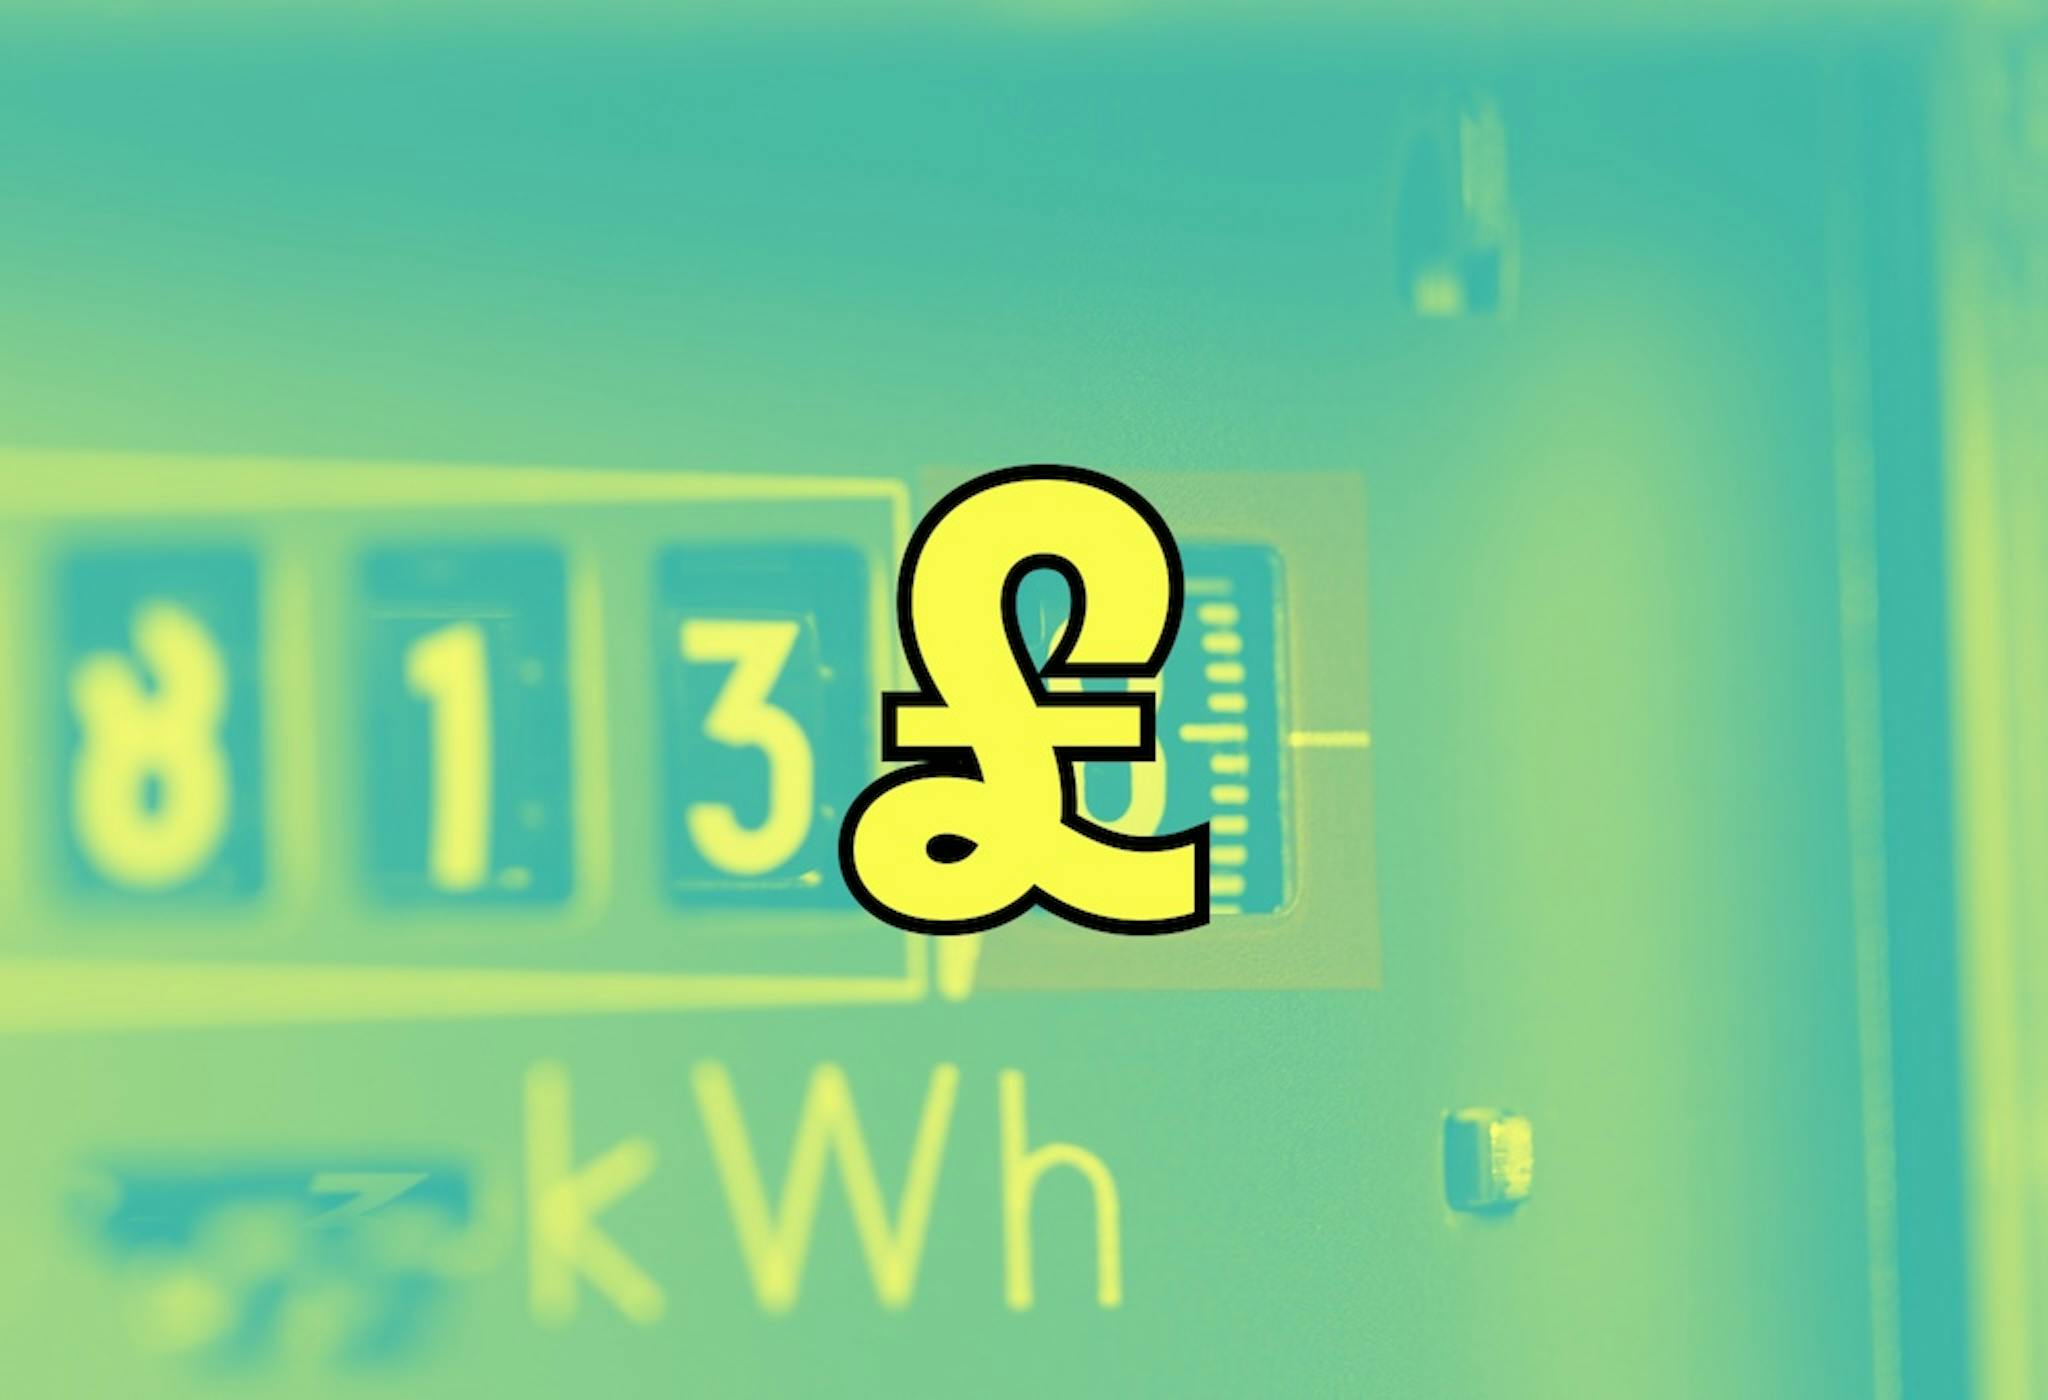 Zoomed in photo of an electricity meter, overlaid with the blueish filter and a carton yellow '£' symbol in the centre